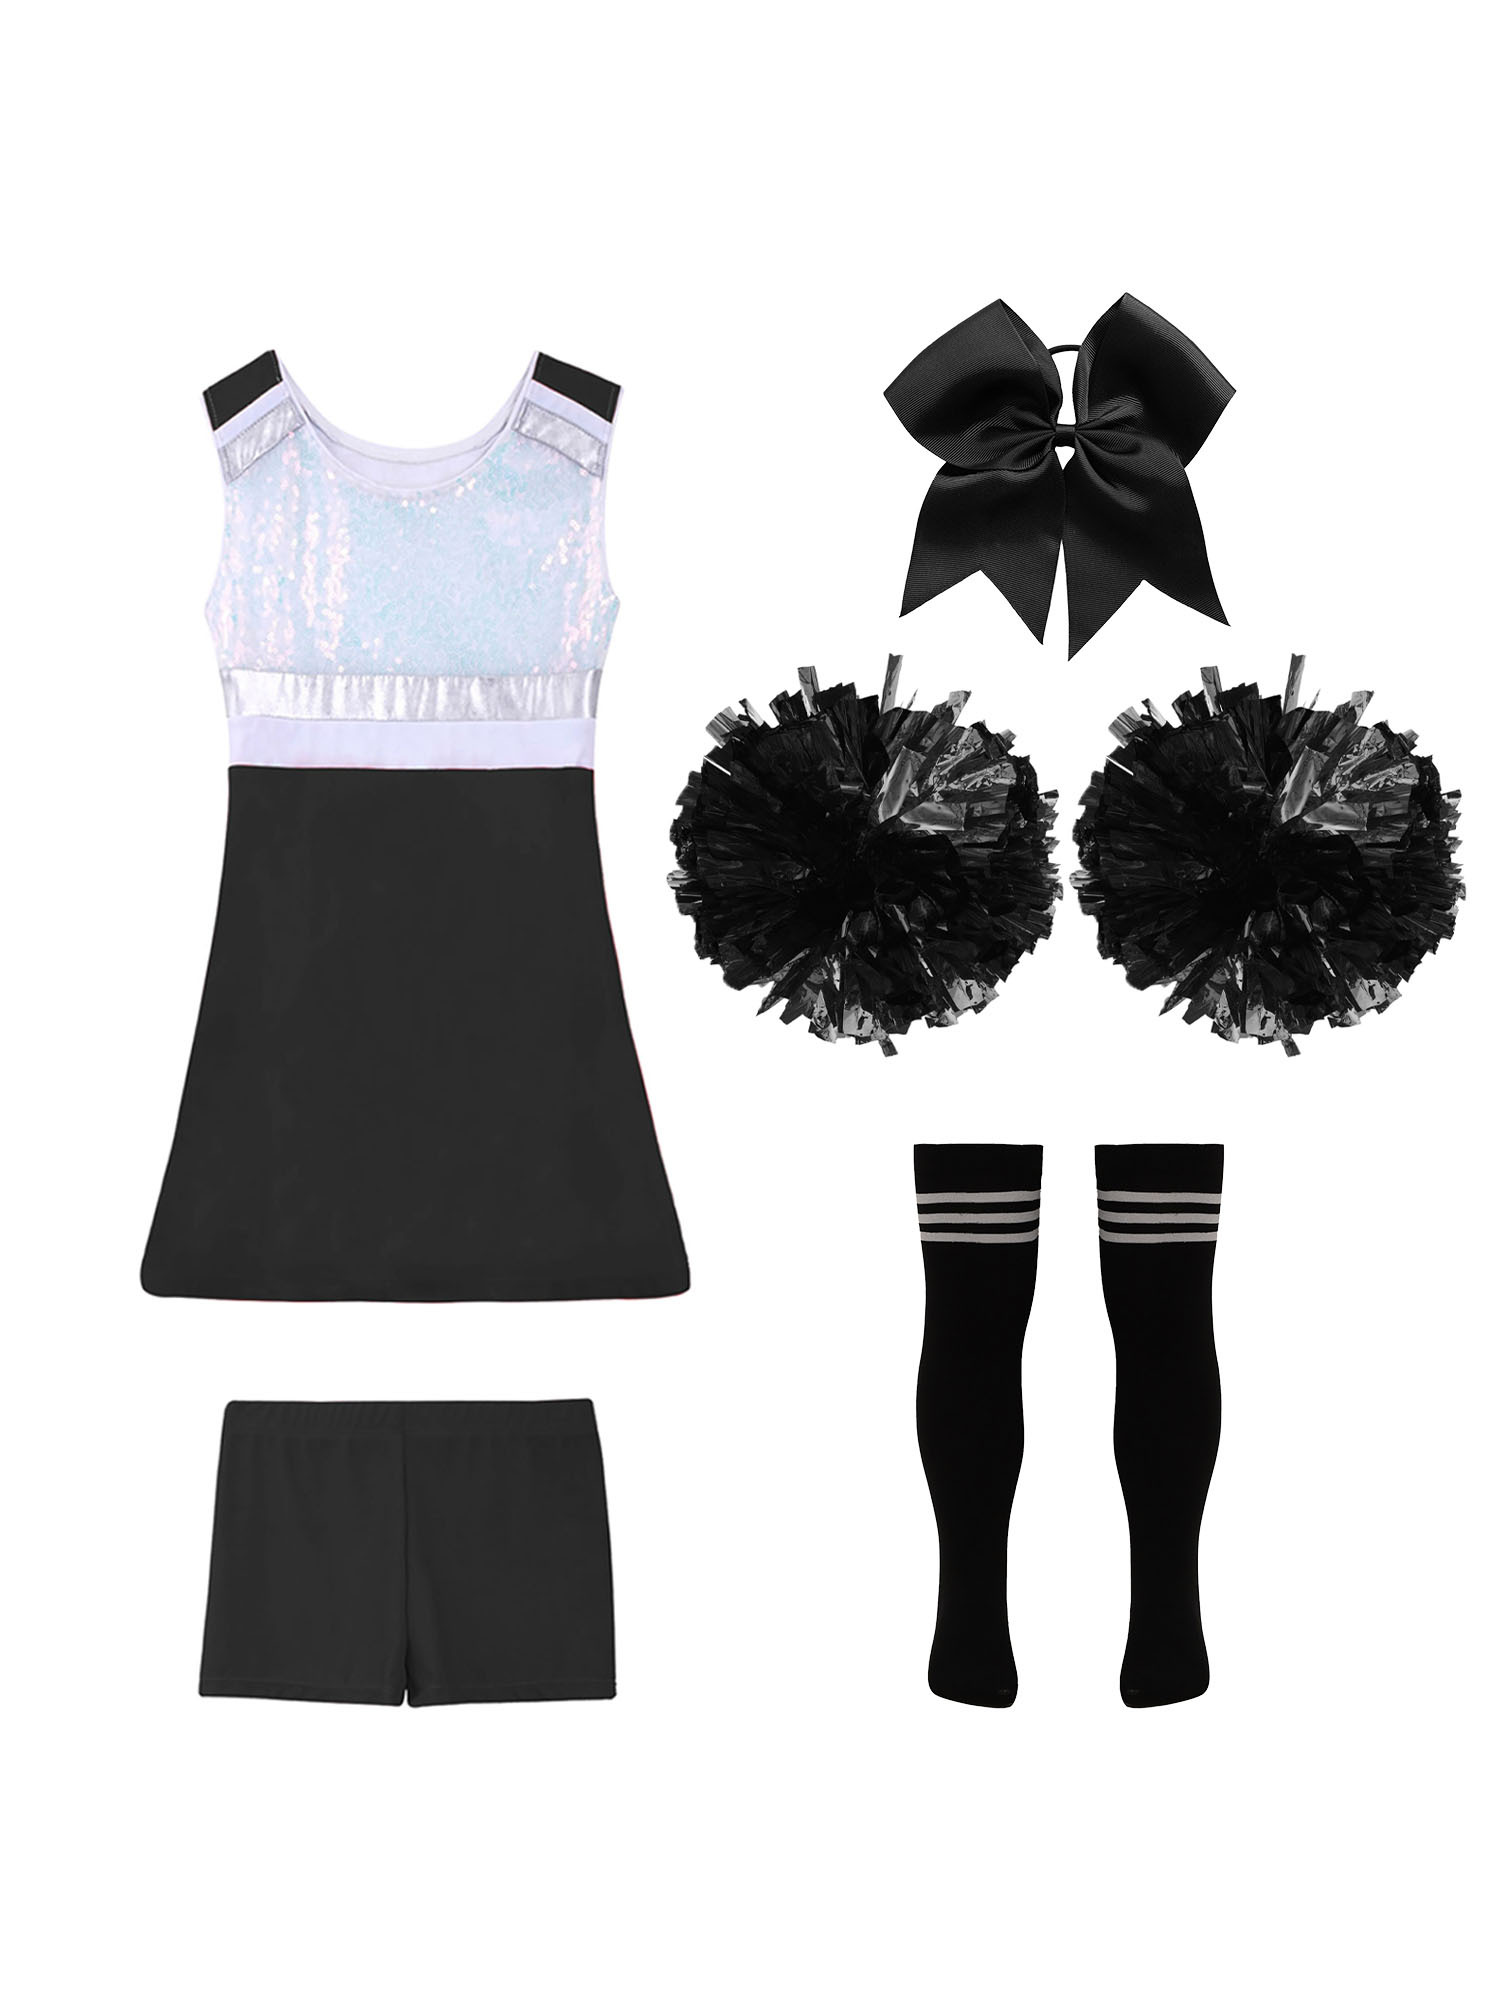 TiaoBug Kids Girls Cheer Leader Uniform Sports Games Cheerleading Dance Outfits Halloween Carnival Fancy Dress Up A Black&White 14 - image 3 of 5